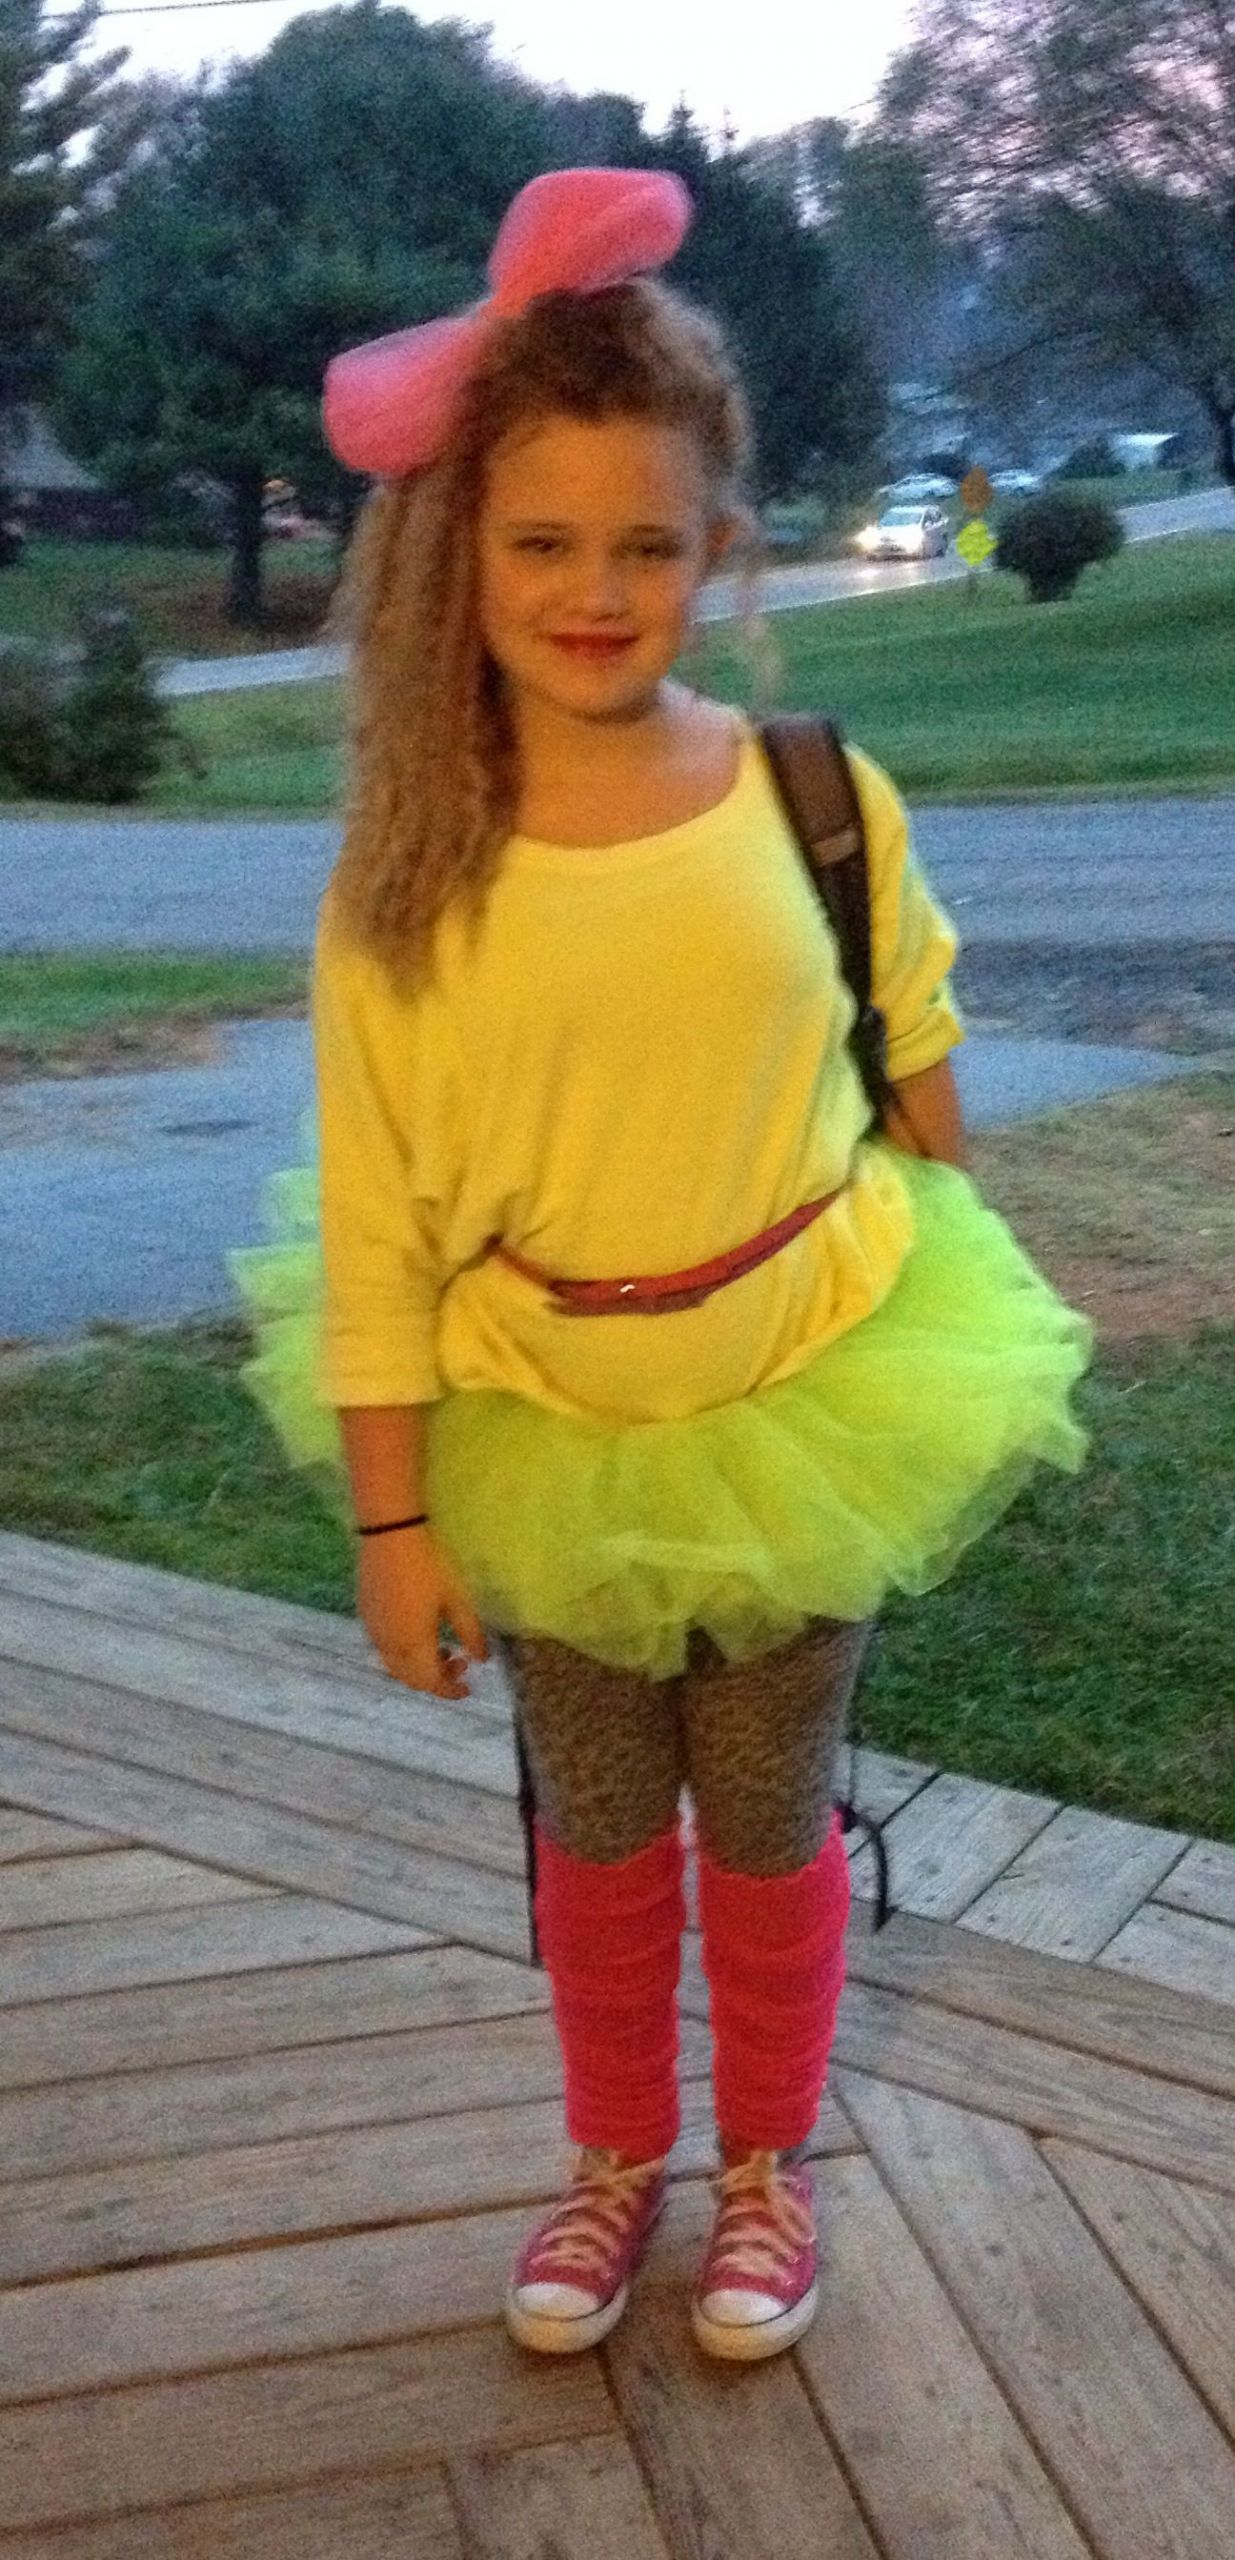 80S Dress Up Ideas For Kids
 80s Halloween Costume LOVE THE HAIR AND BIG BOW